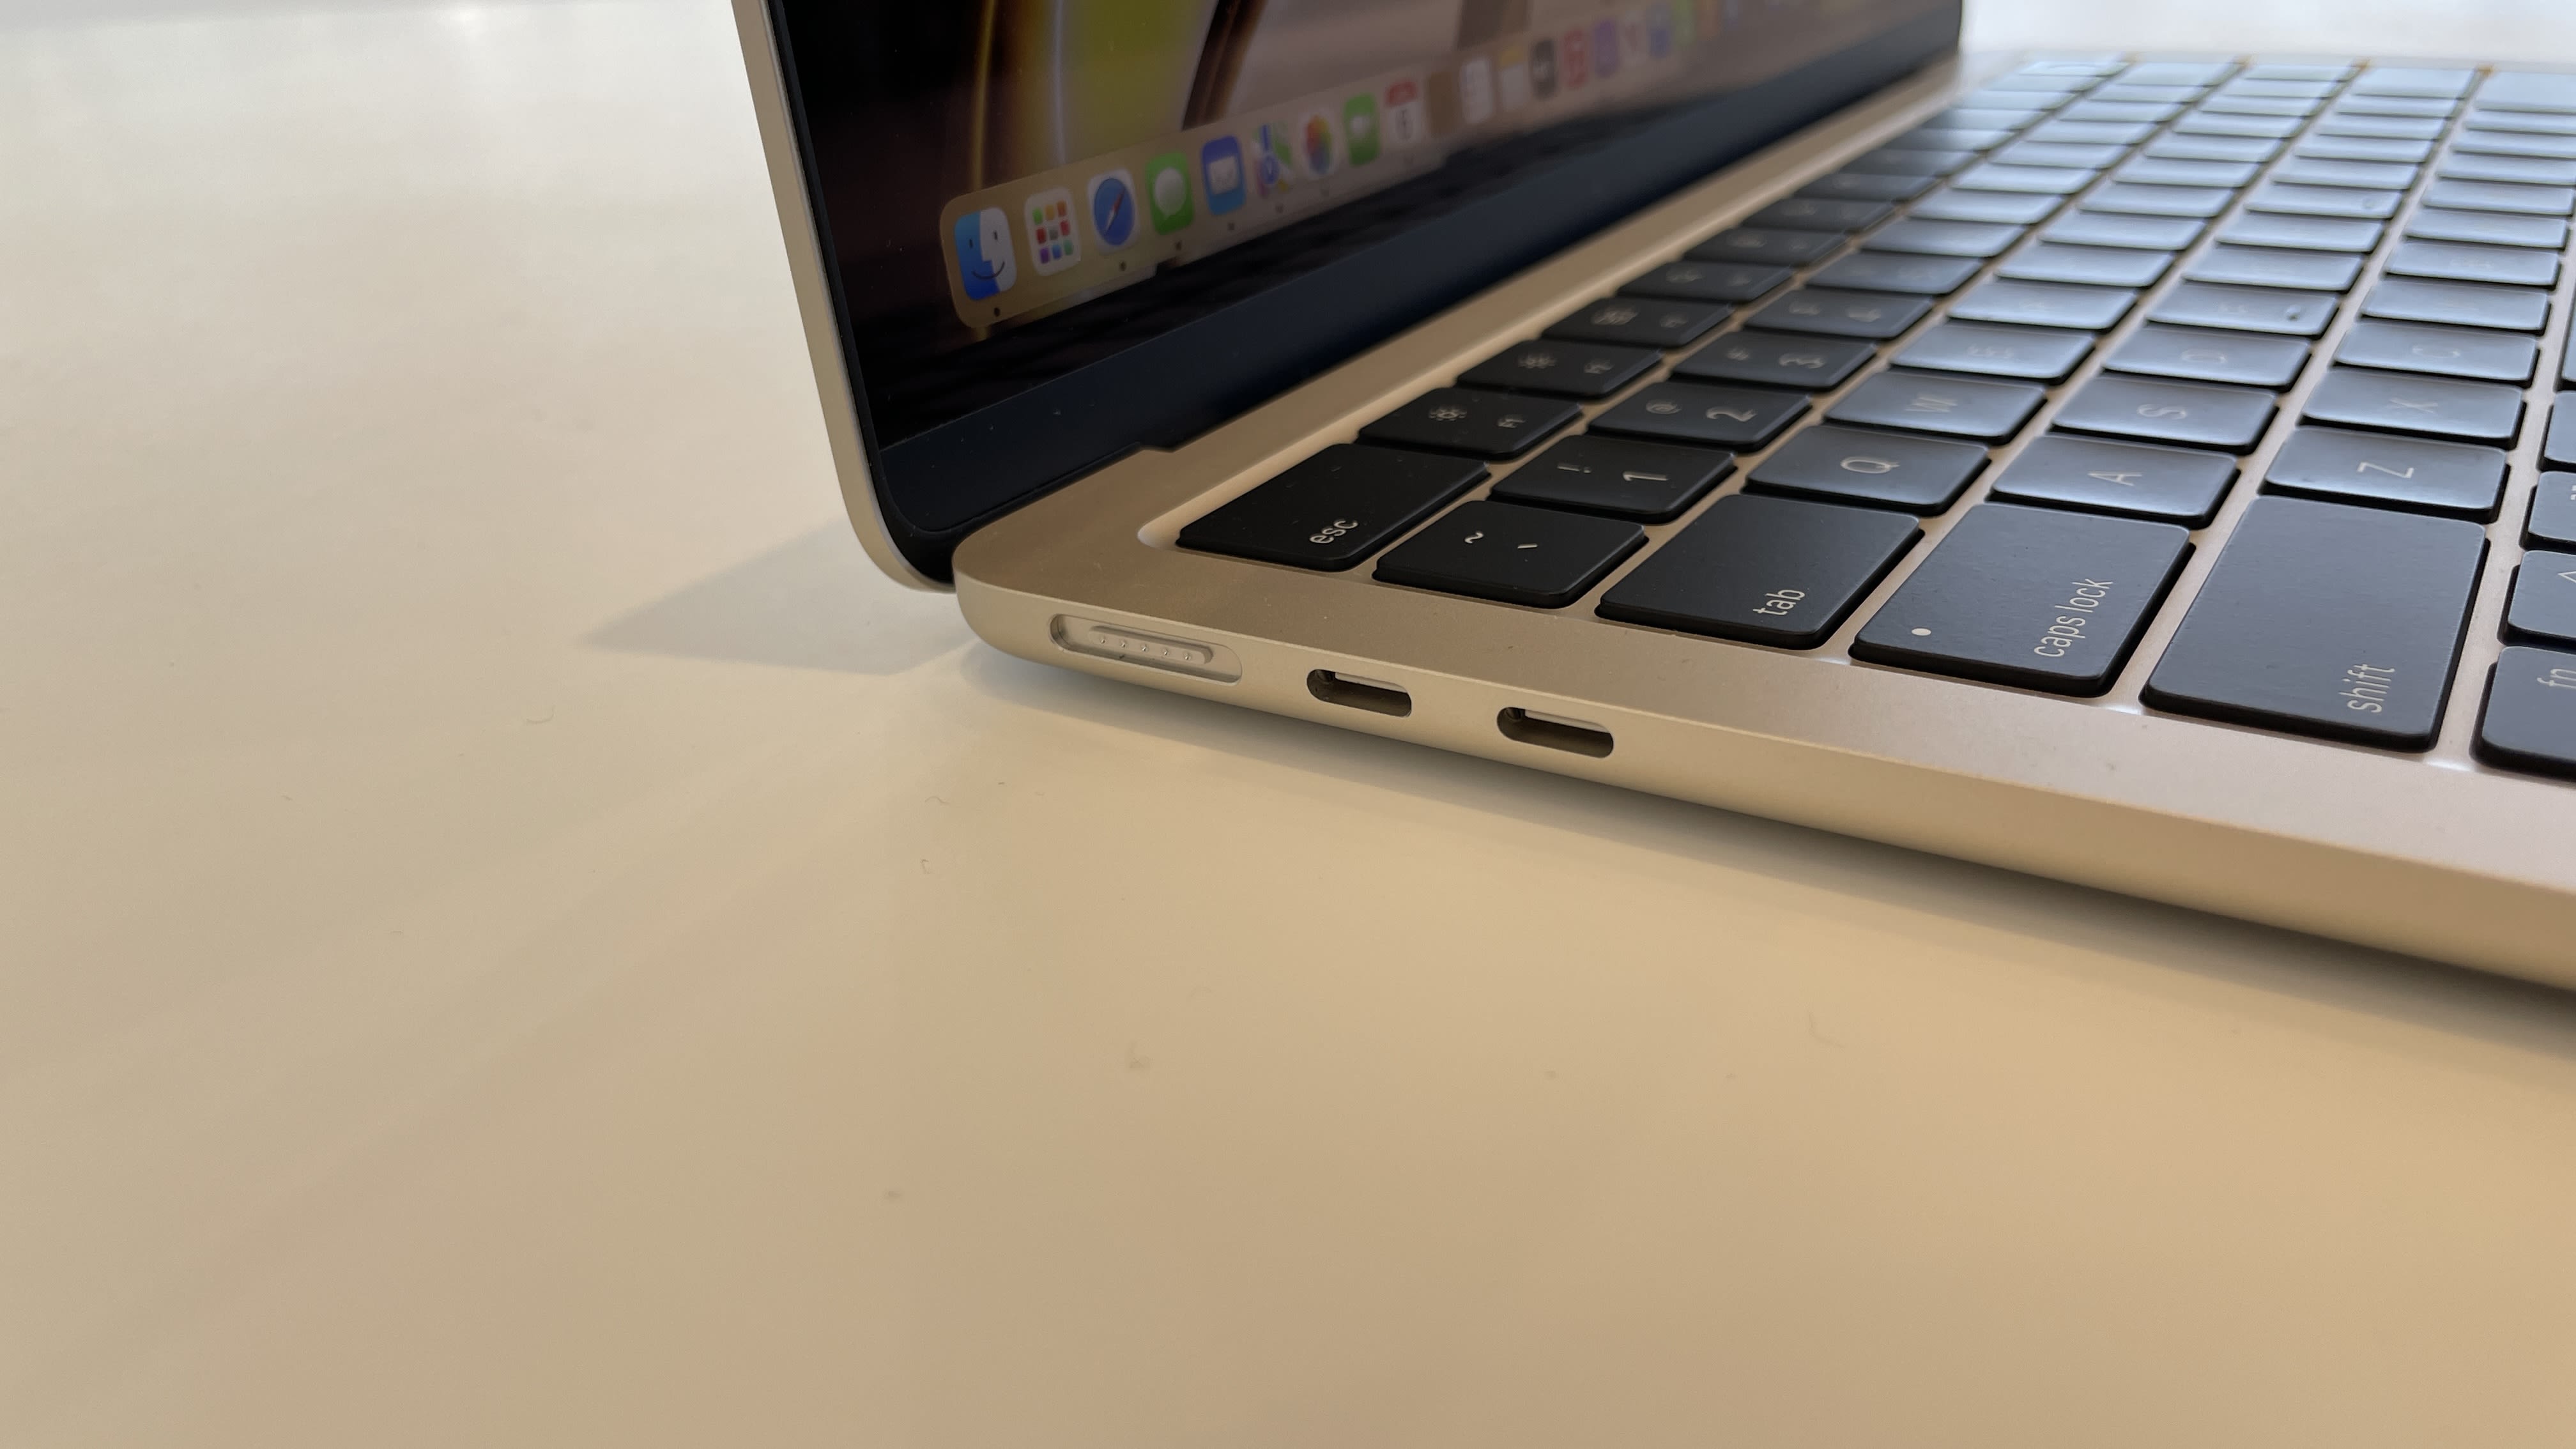 If you own an M2 MacBook Air or MacBook Pro, there's an update…for